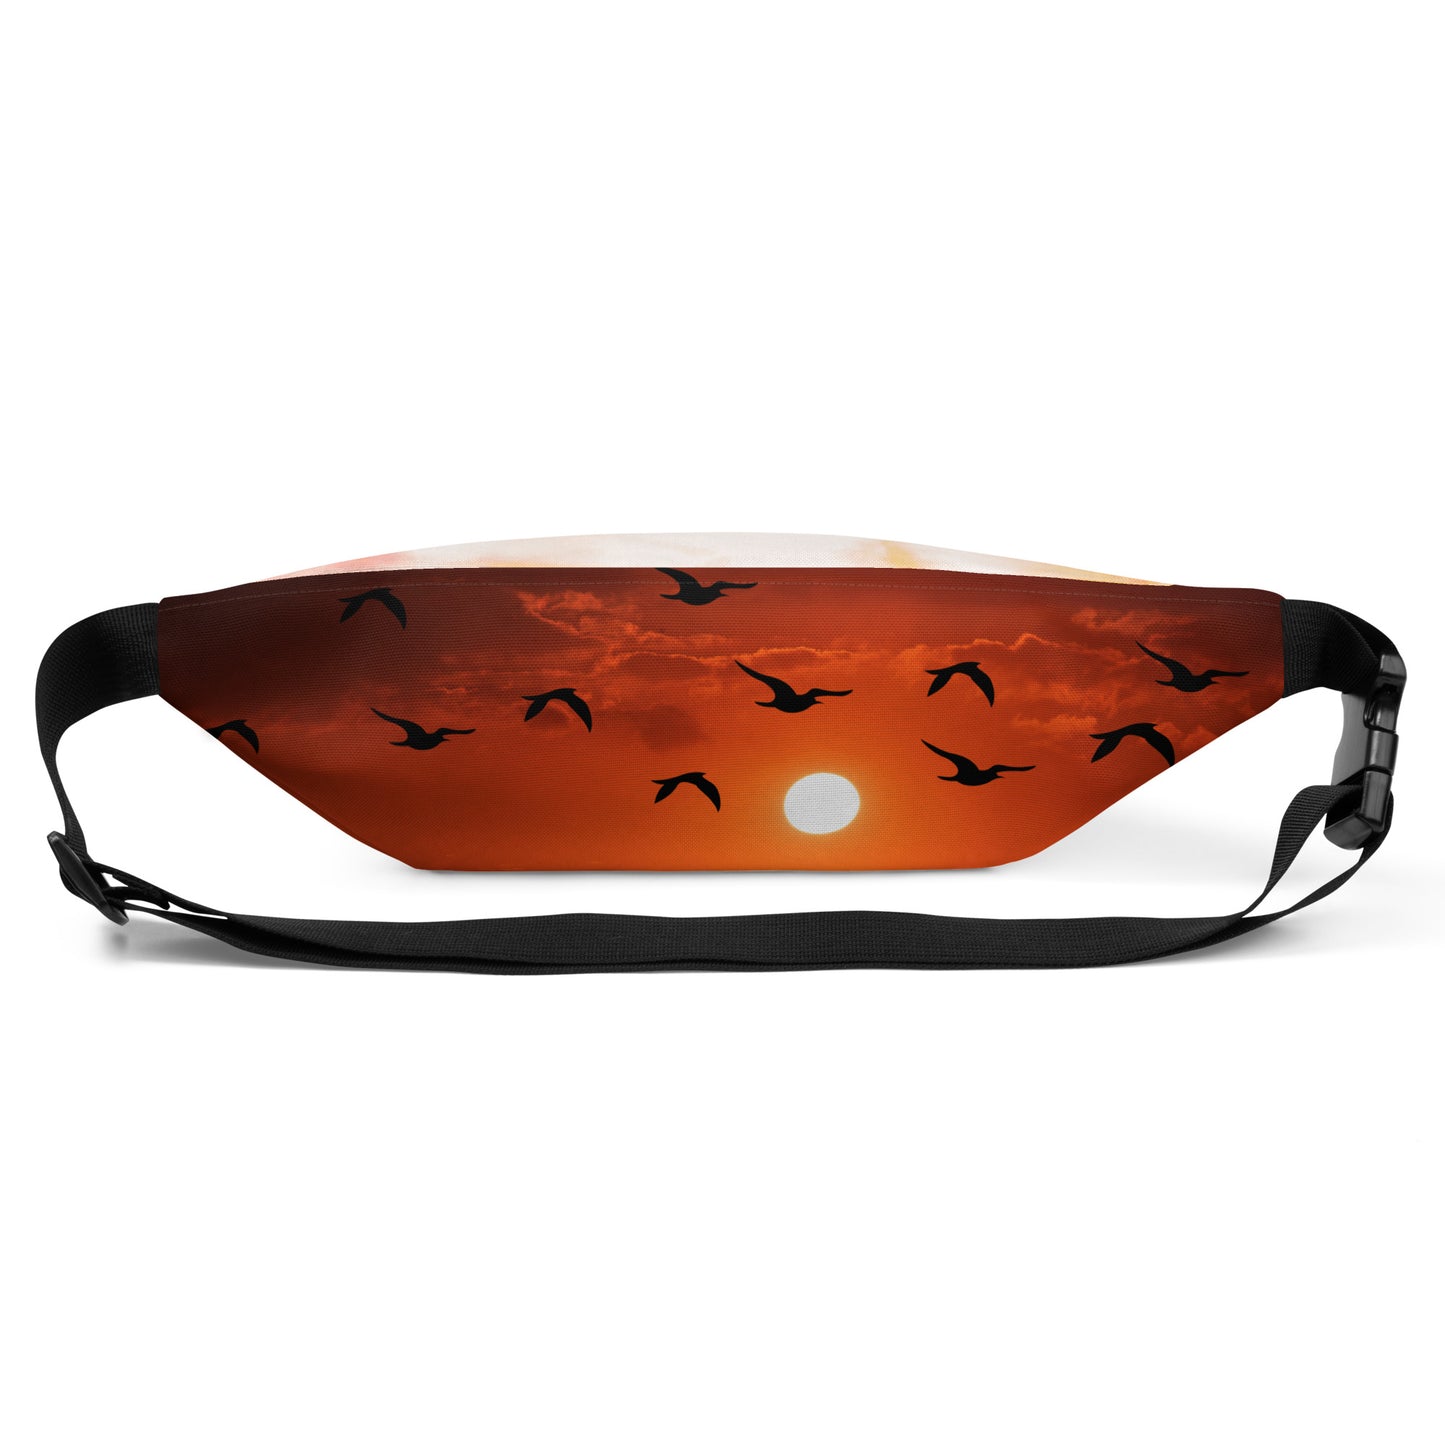 Fanny Pack ( The Sunset Collection )